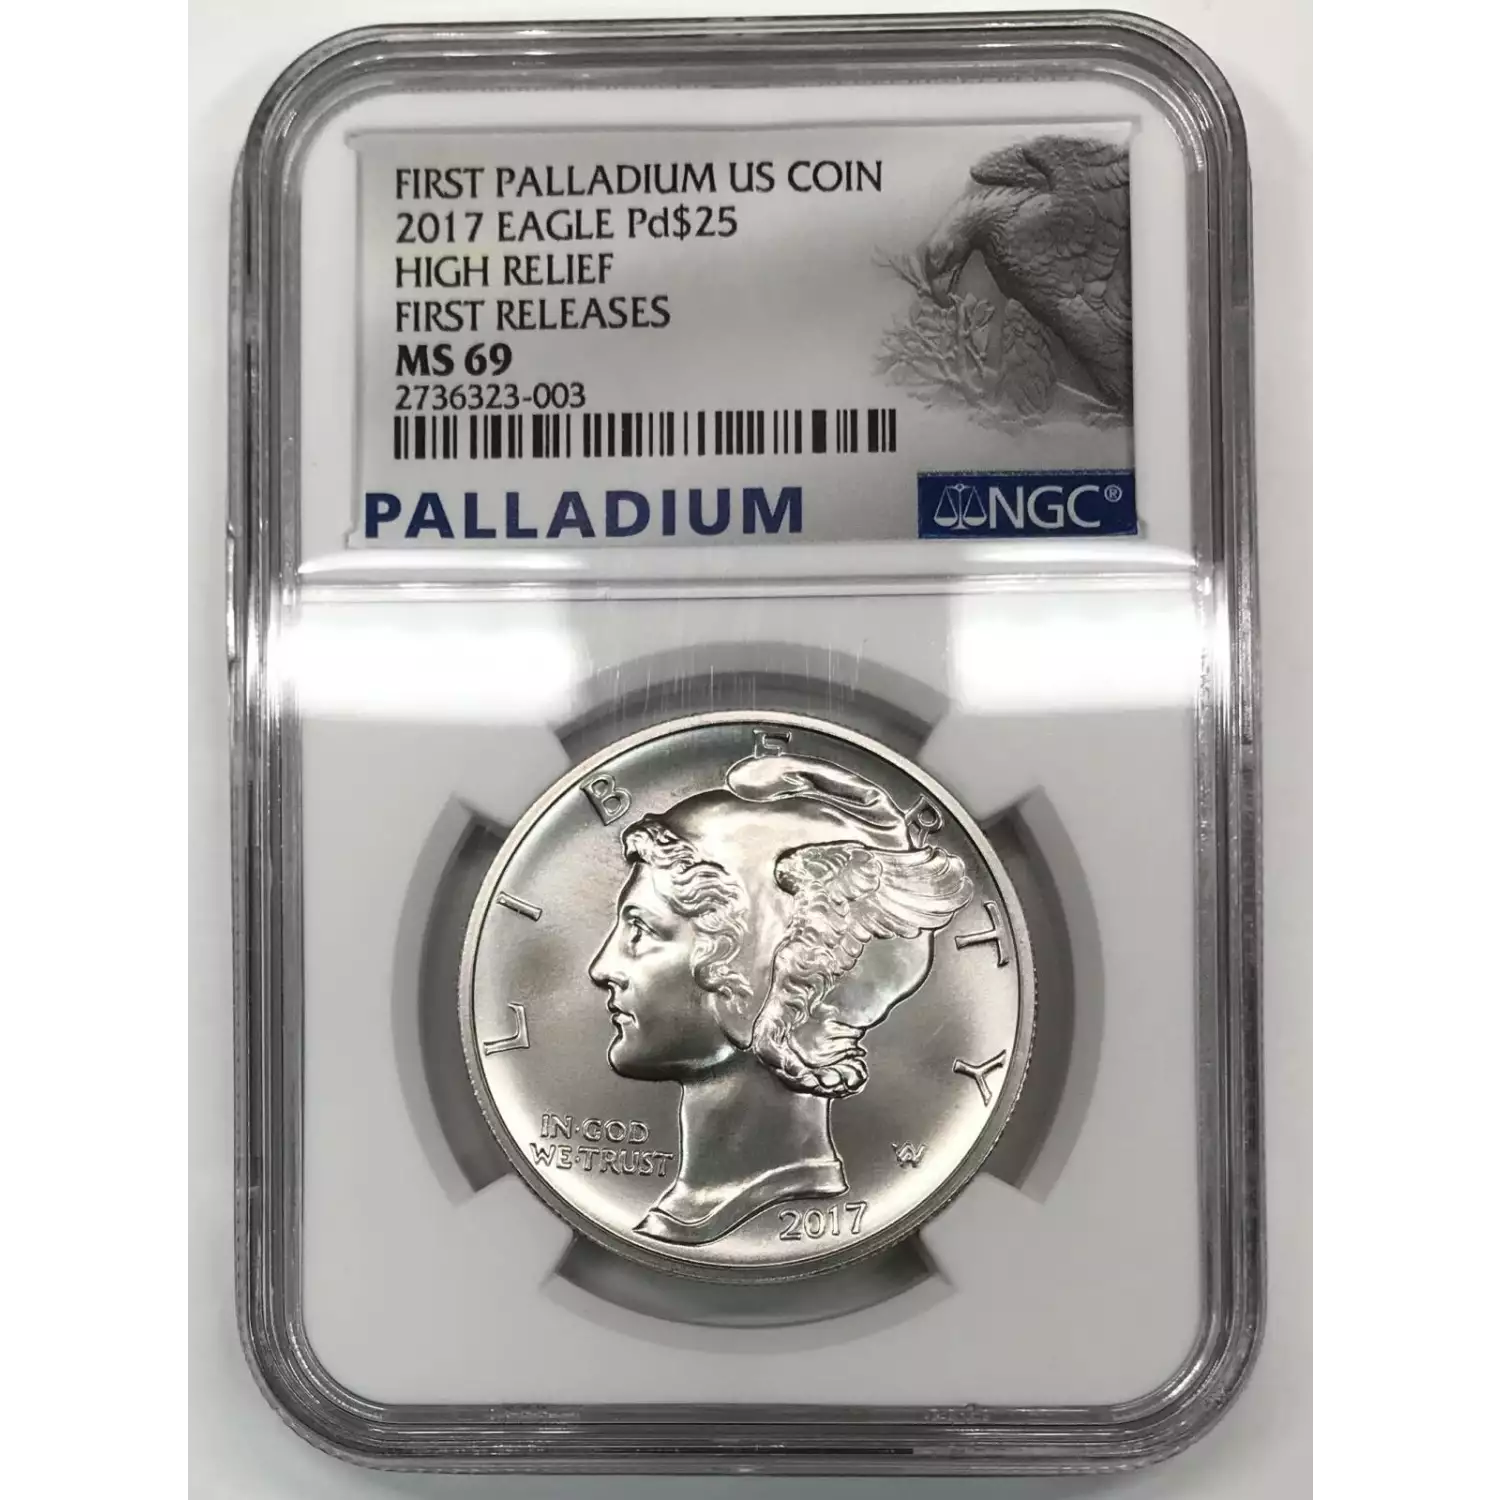 2017 HIGH RELIEF FIRST RELEASES FIRST PALLADIUM US COIN 